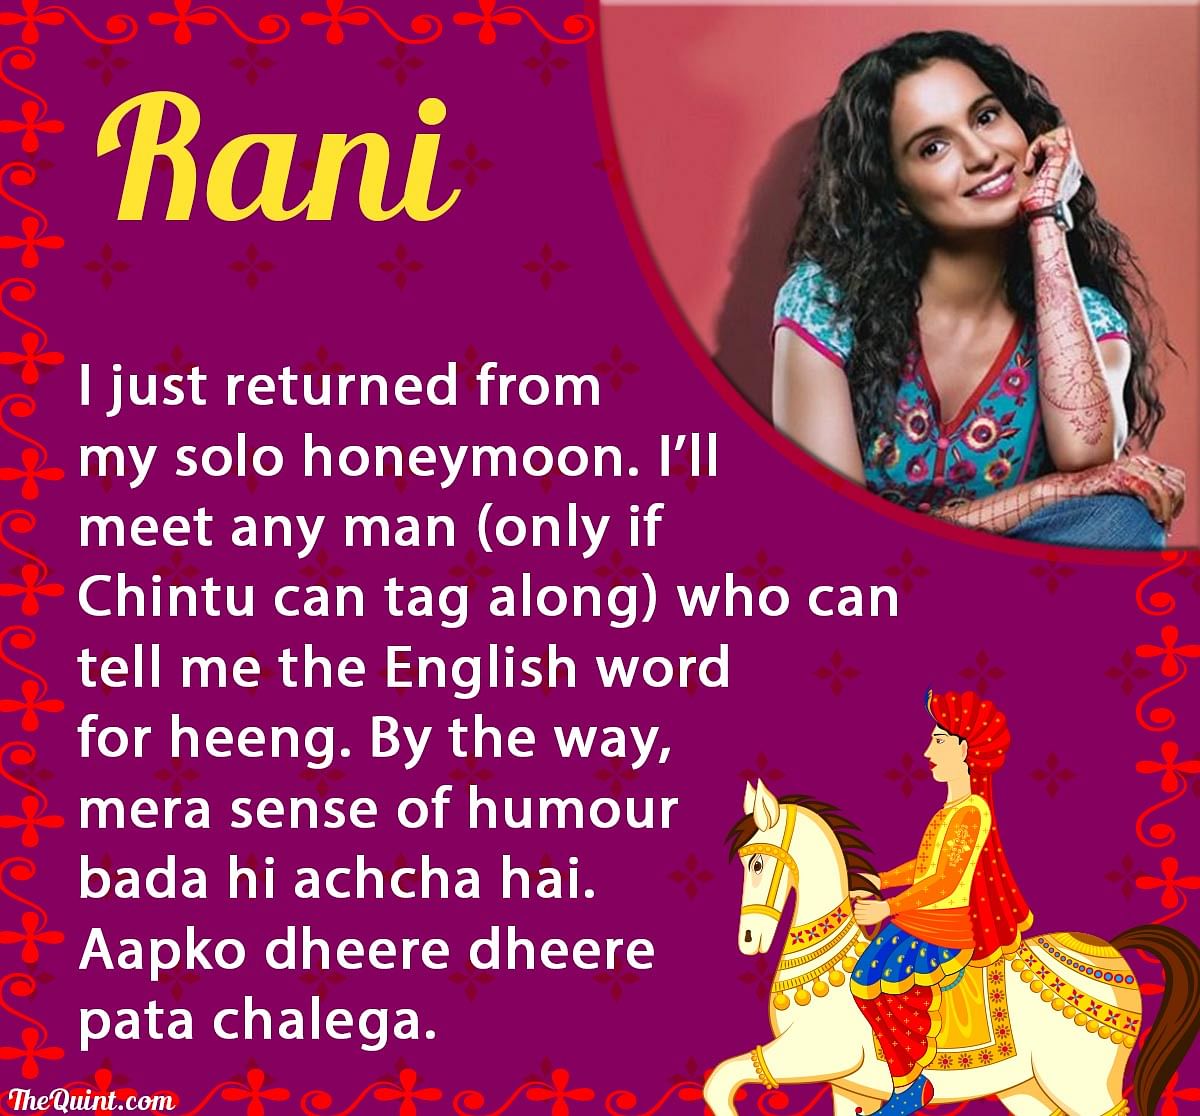 Rani from Queen is looking for a groom.